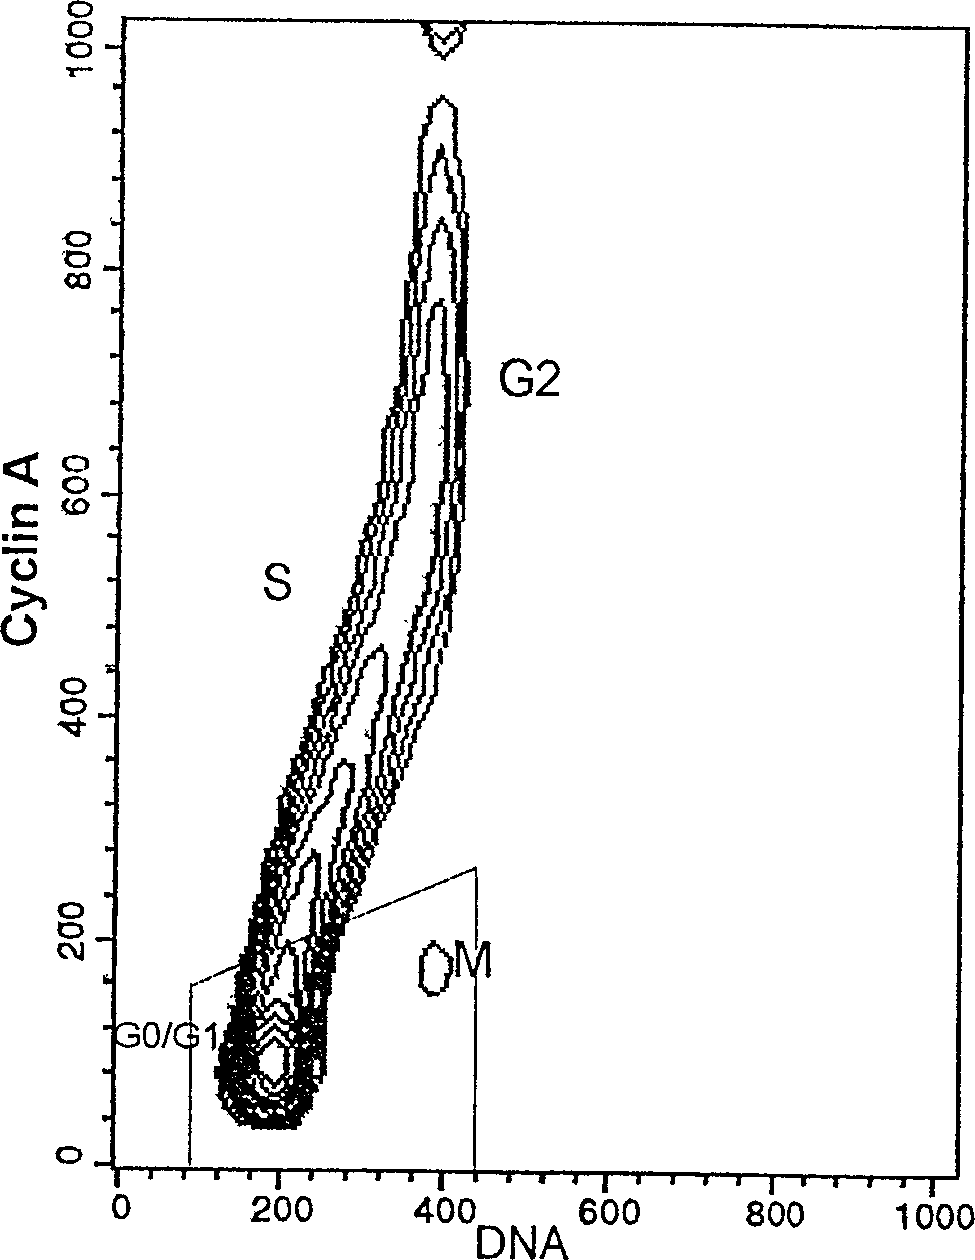 Double-parameter cell period analysis method